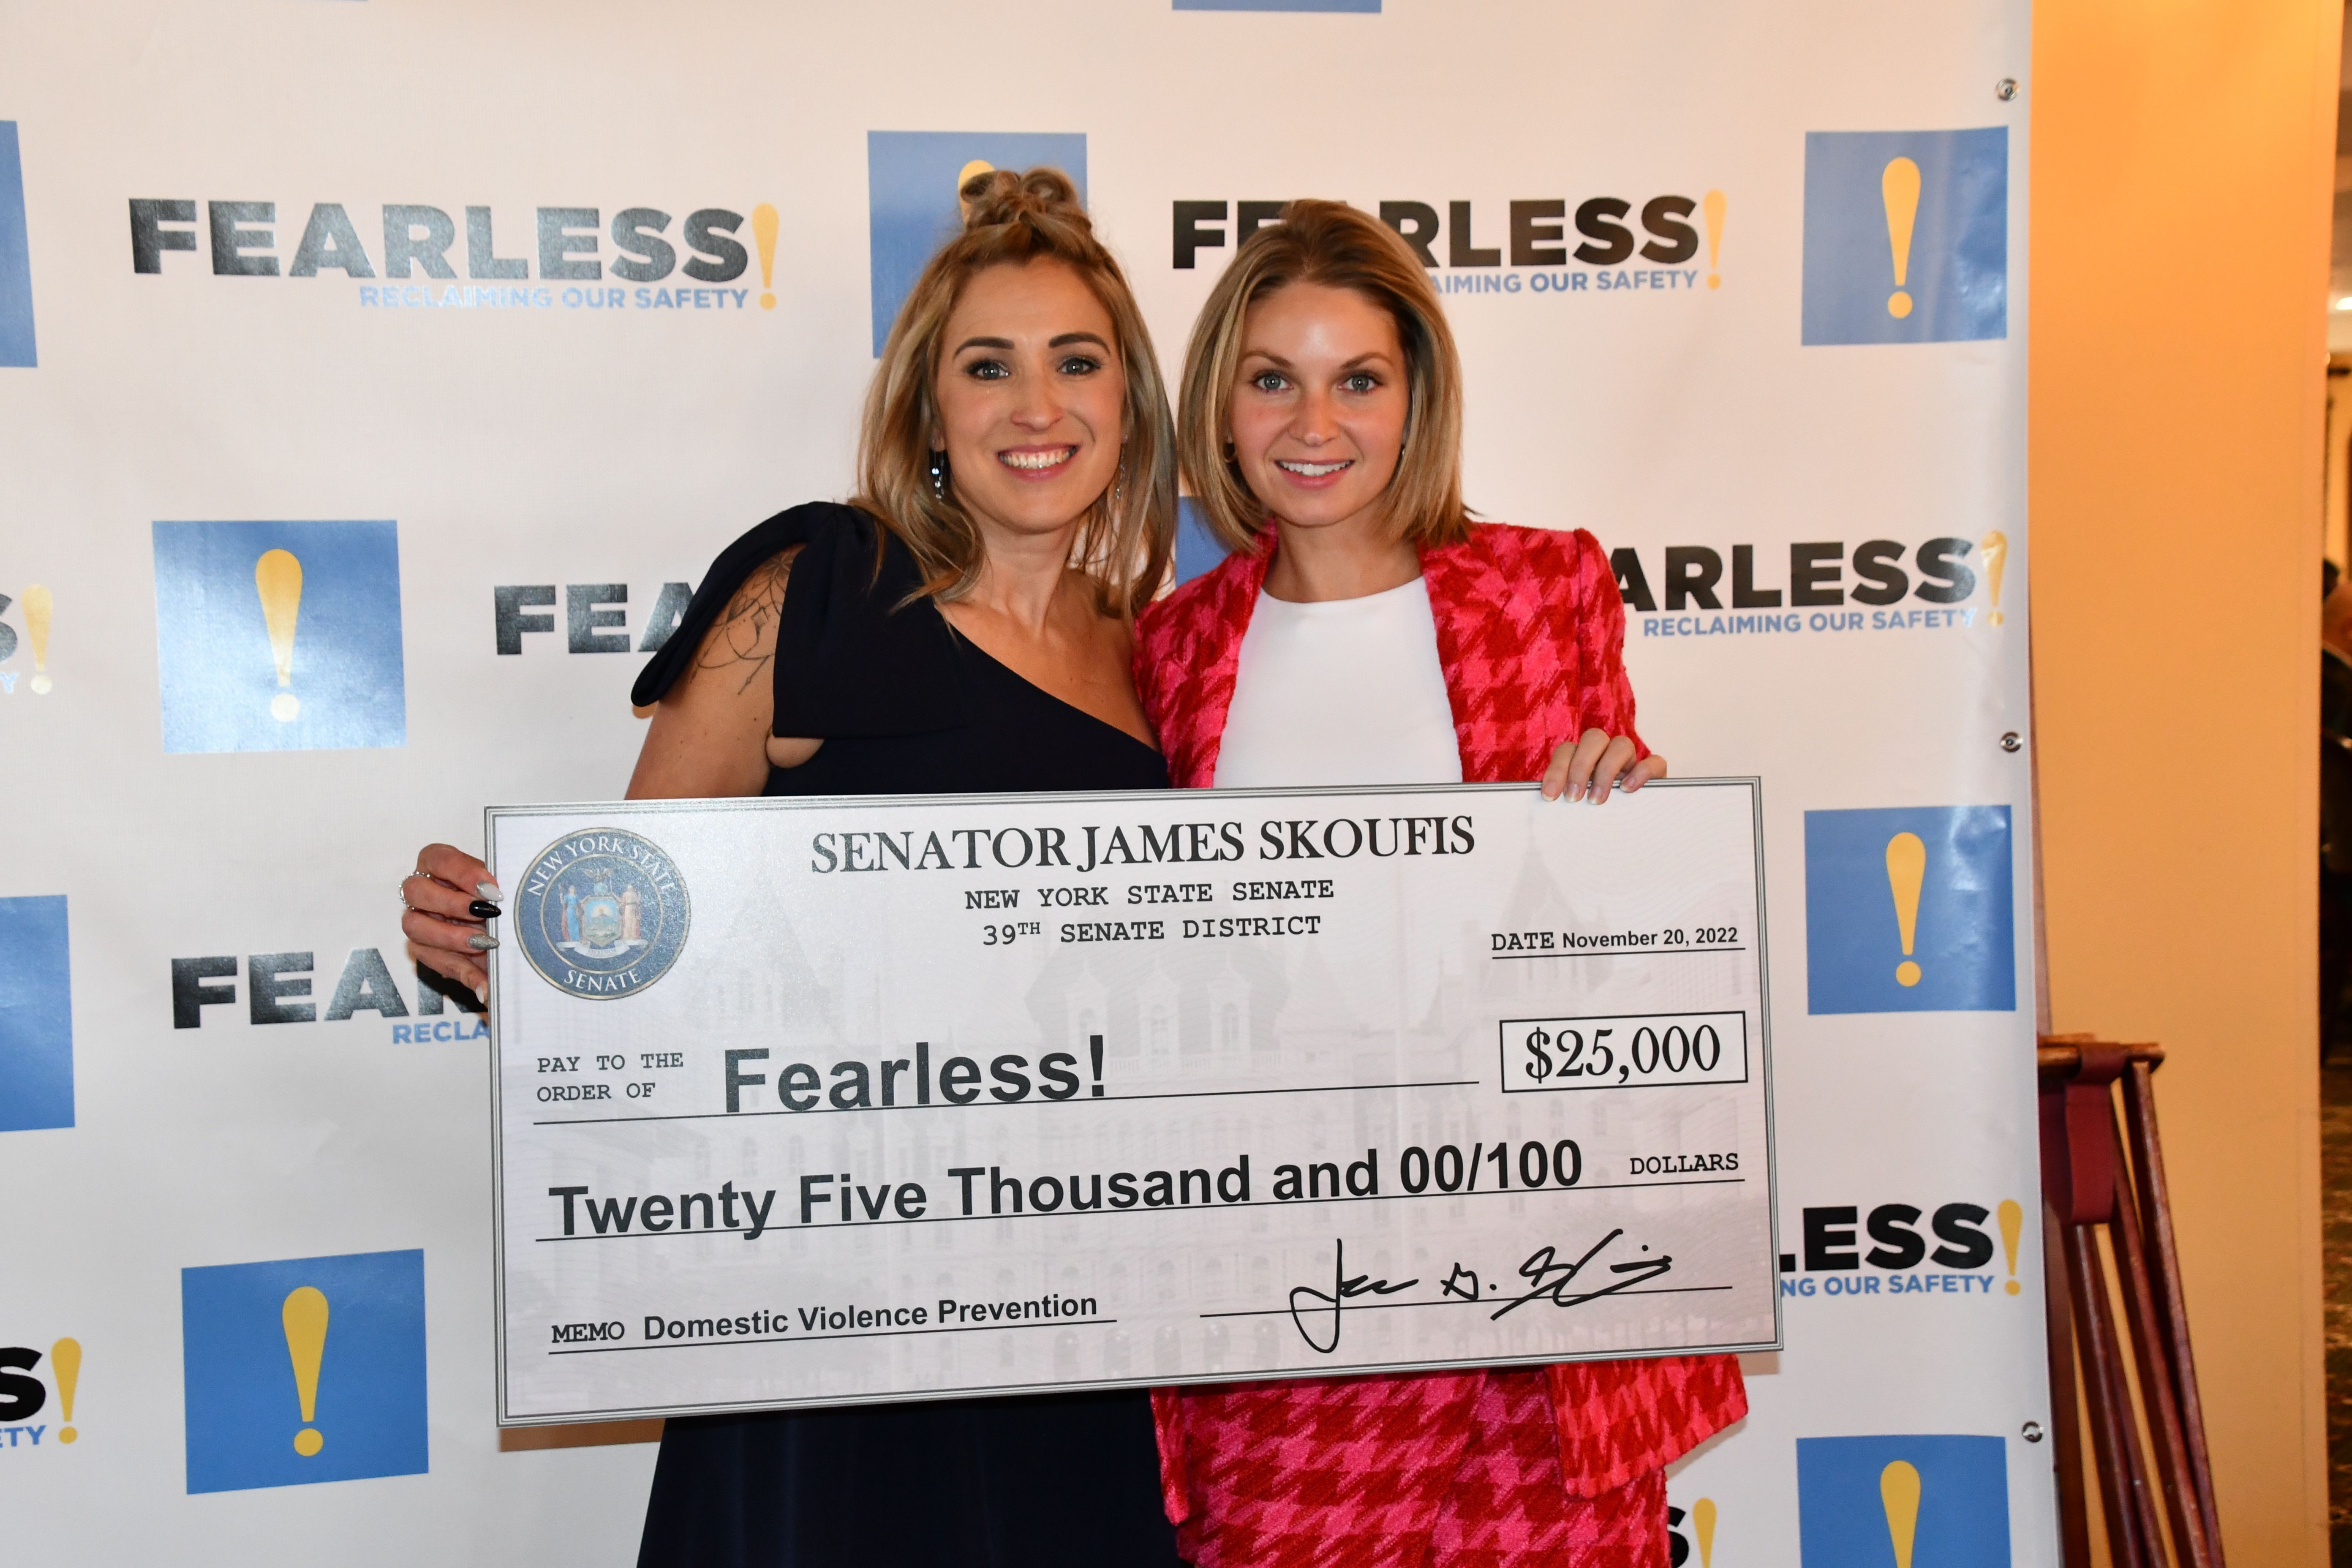 With domestic violence calls increase, Fearless! is granted $25,000 in annual funding to address it